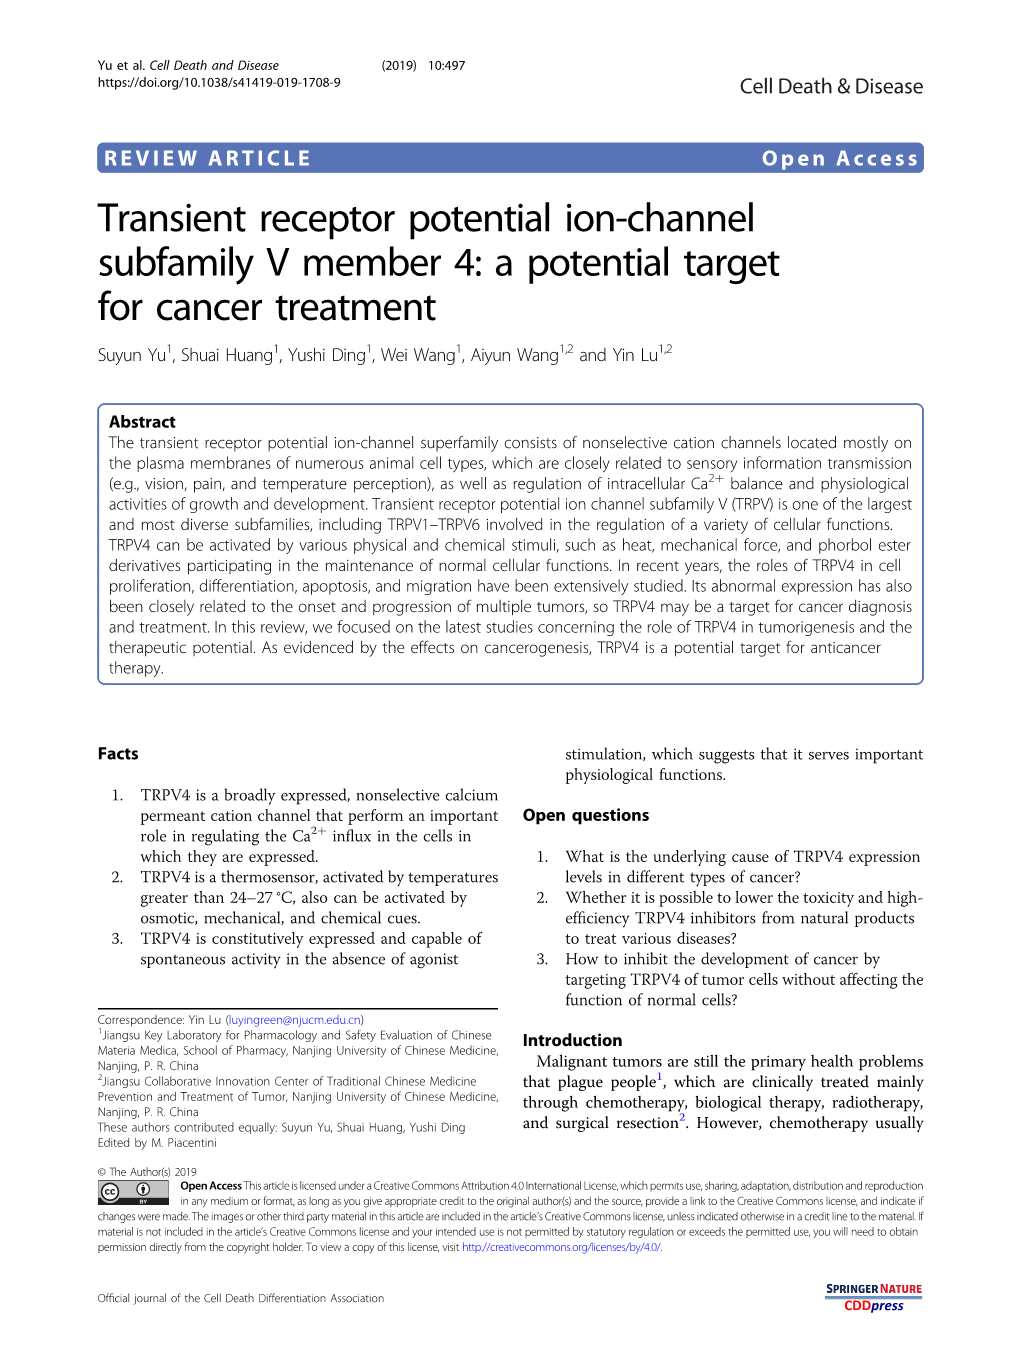 Transient Receptor Potential Ion-Channel Subfamily V Member 4